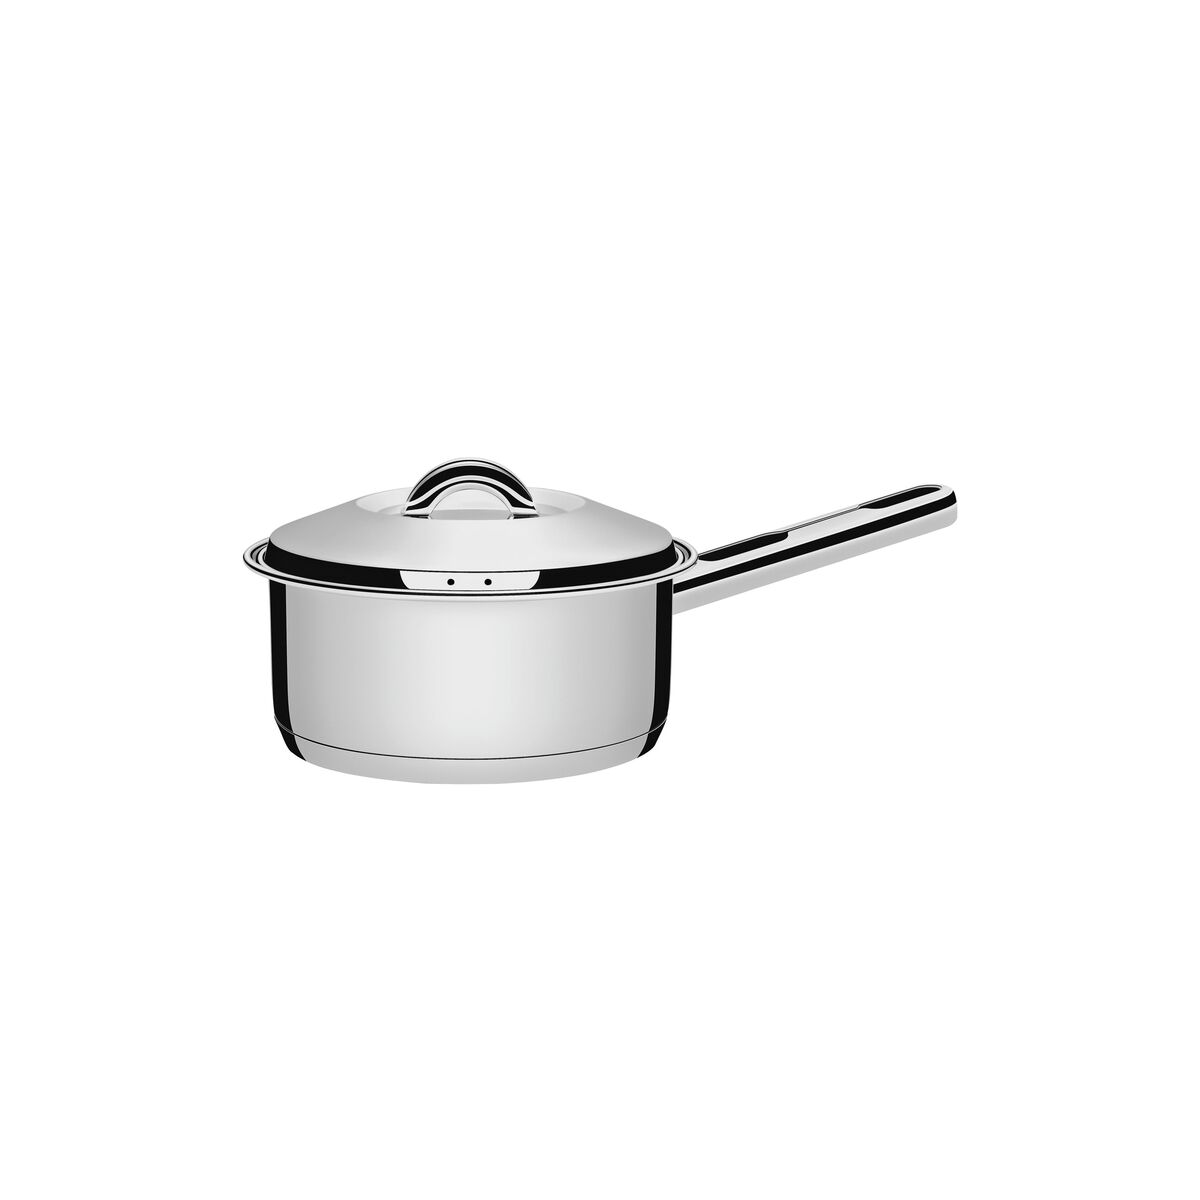 Tramontina Solar 28 cm 7.1 L stainless steel shallow casserole dish with lid,  handles and tri-ply base